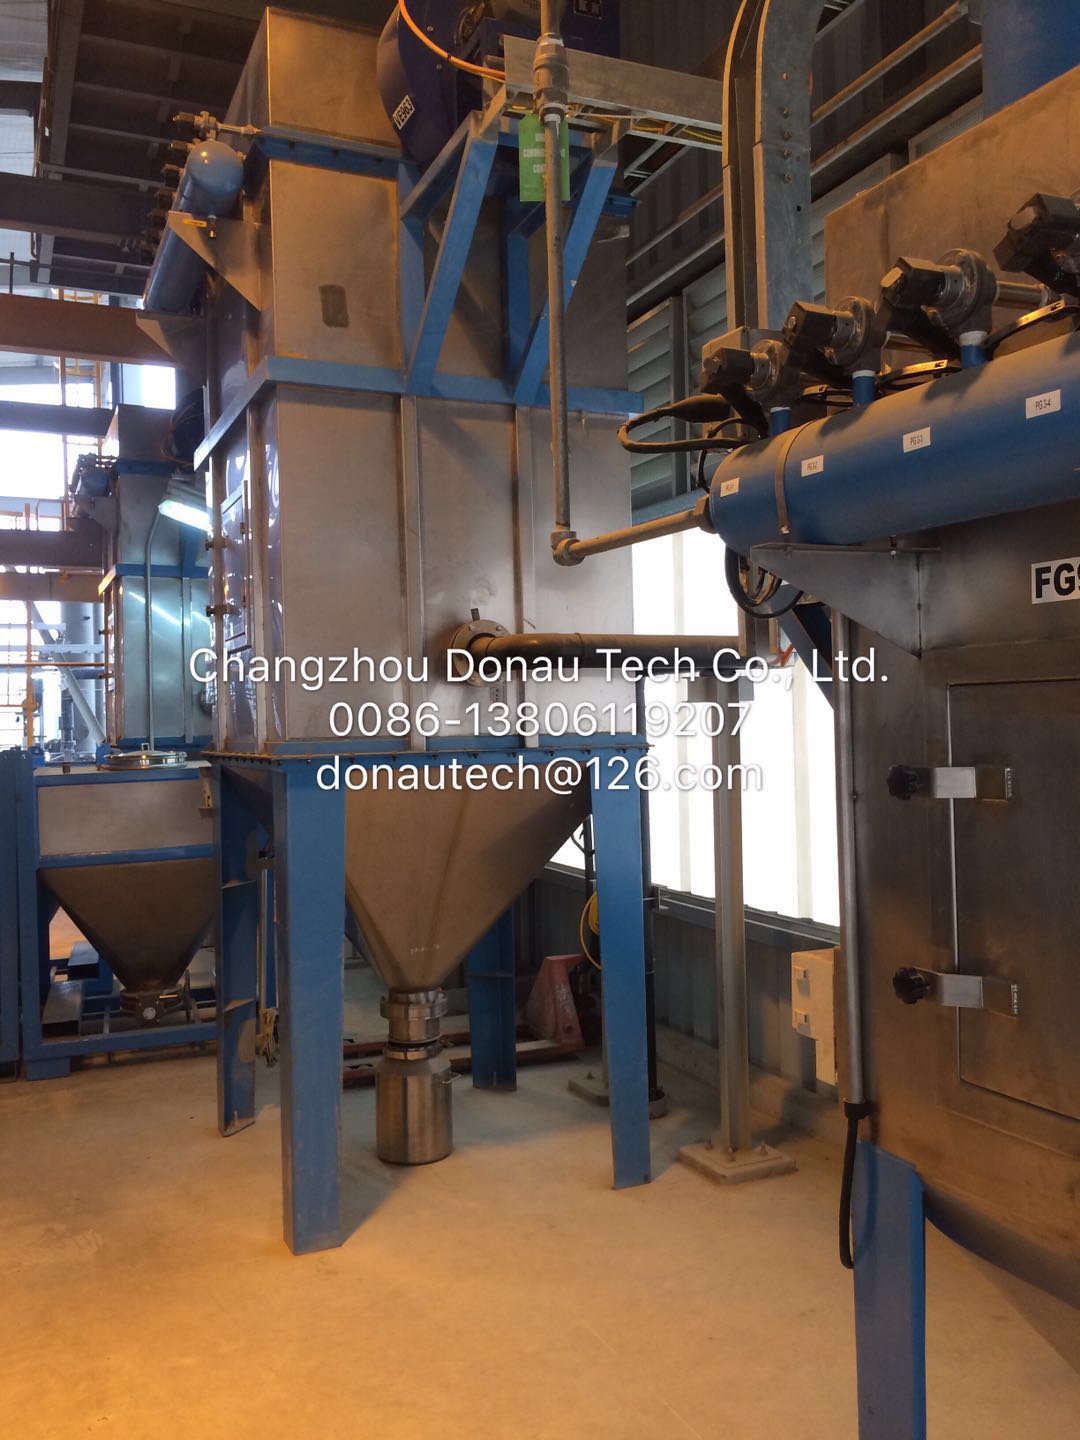 Fluidized bed coating system